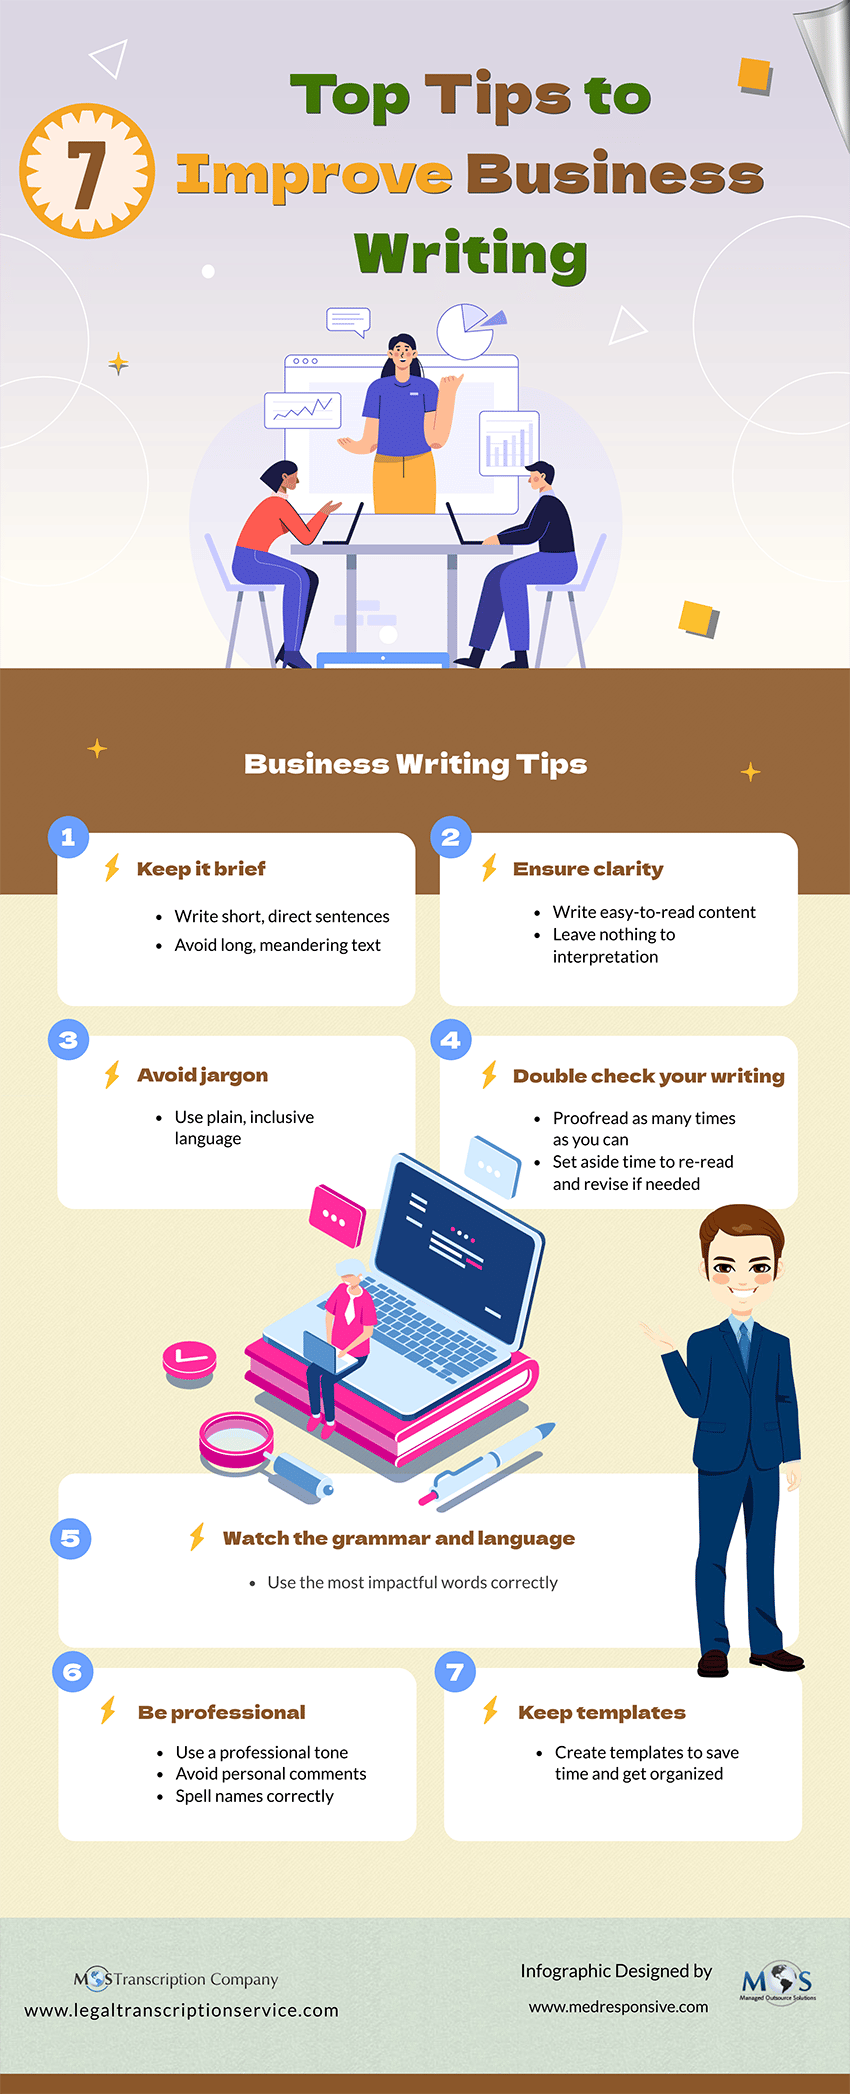 Tips to Improve Business Writing